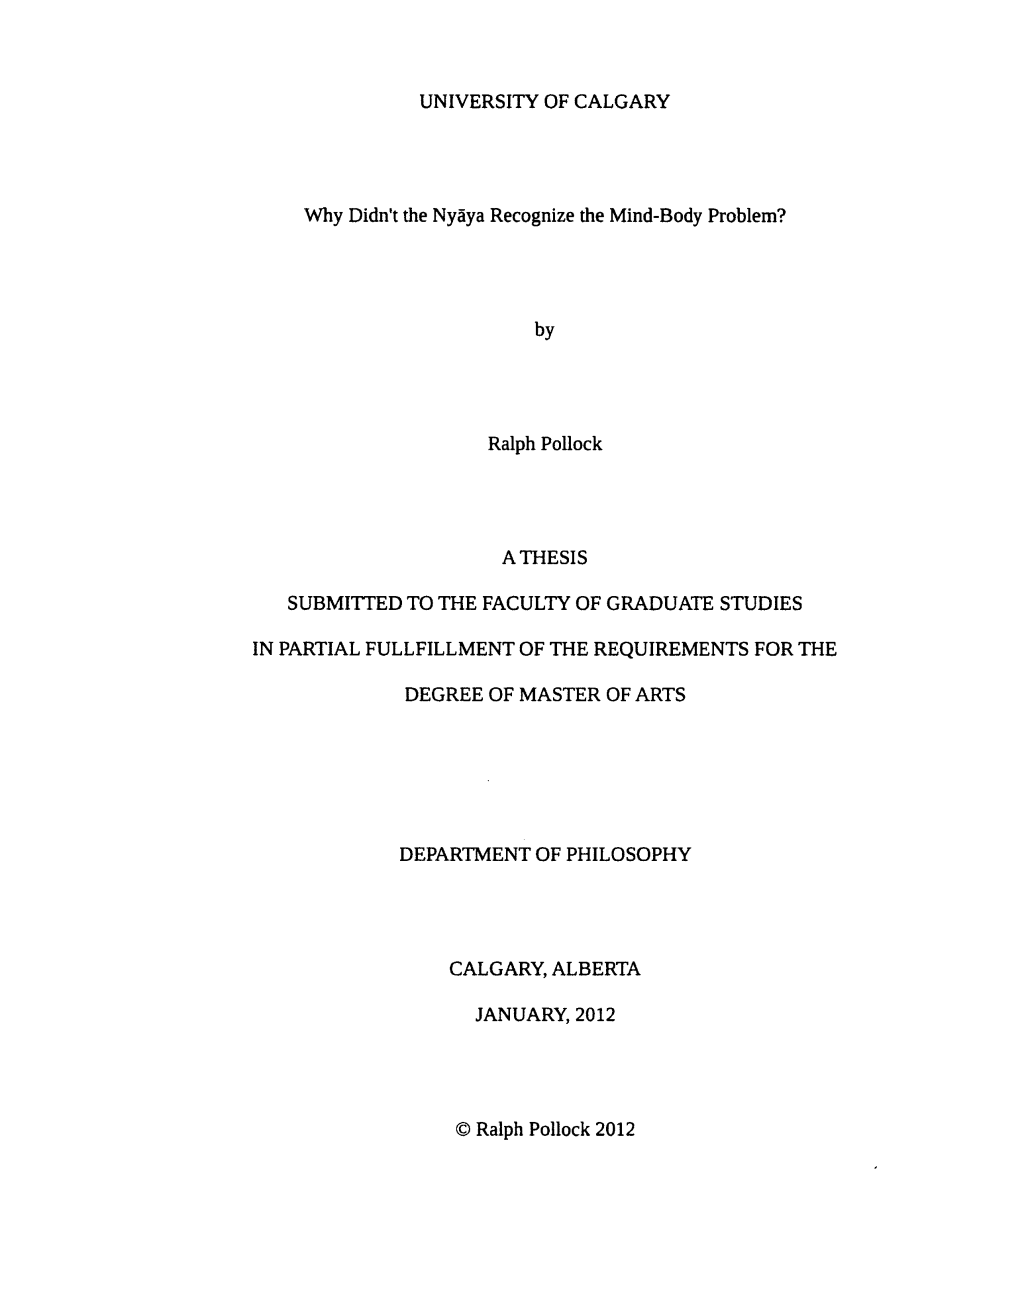 By Ralph Pollock a THESIS SUBMITTED to the FACULTY O